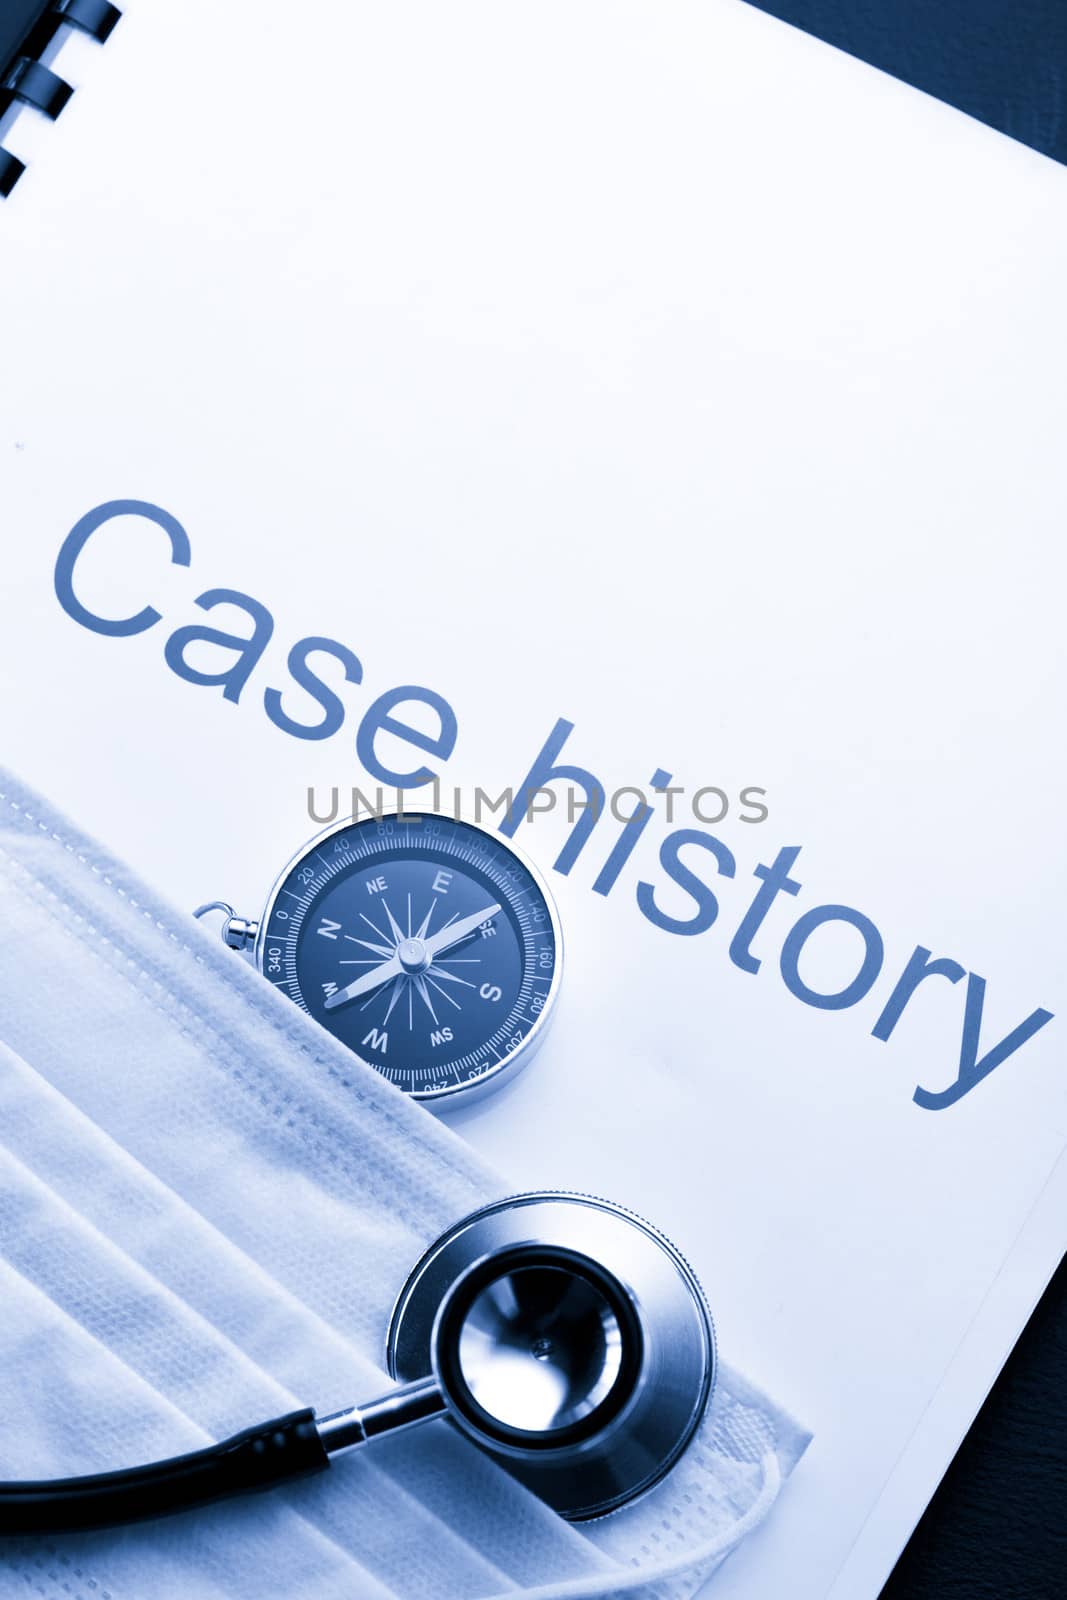 Case history, stethoscope, compass and mask by Garsya